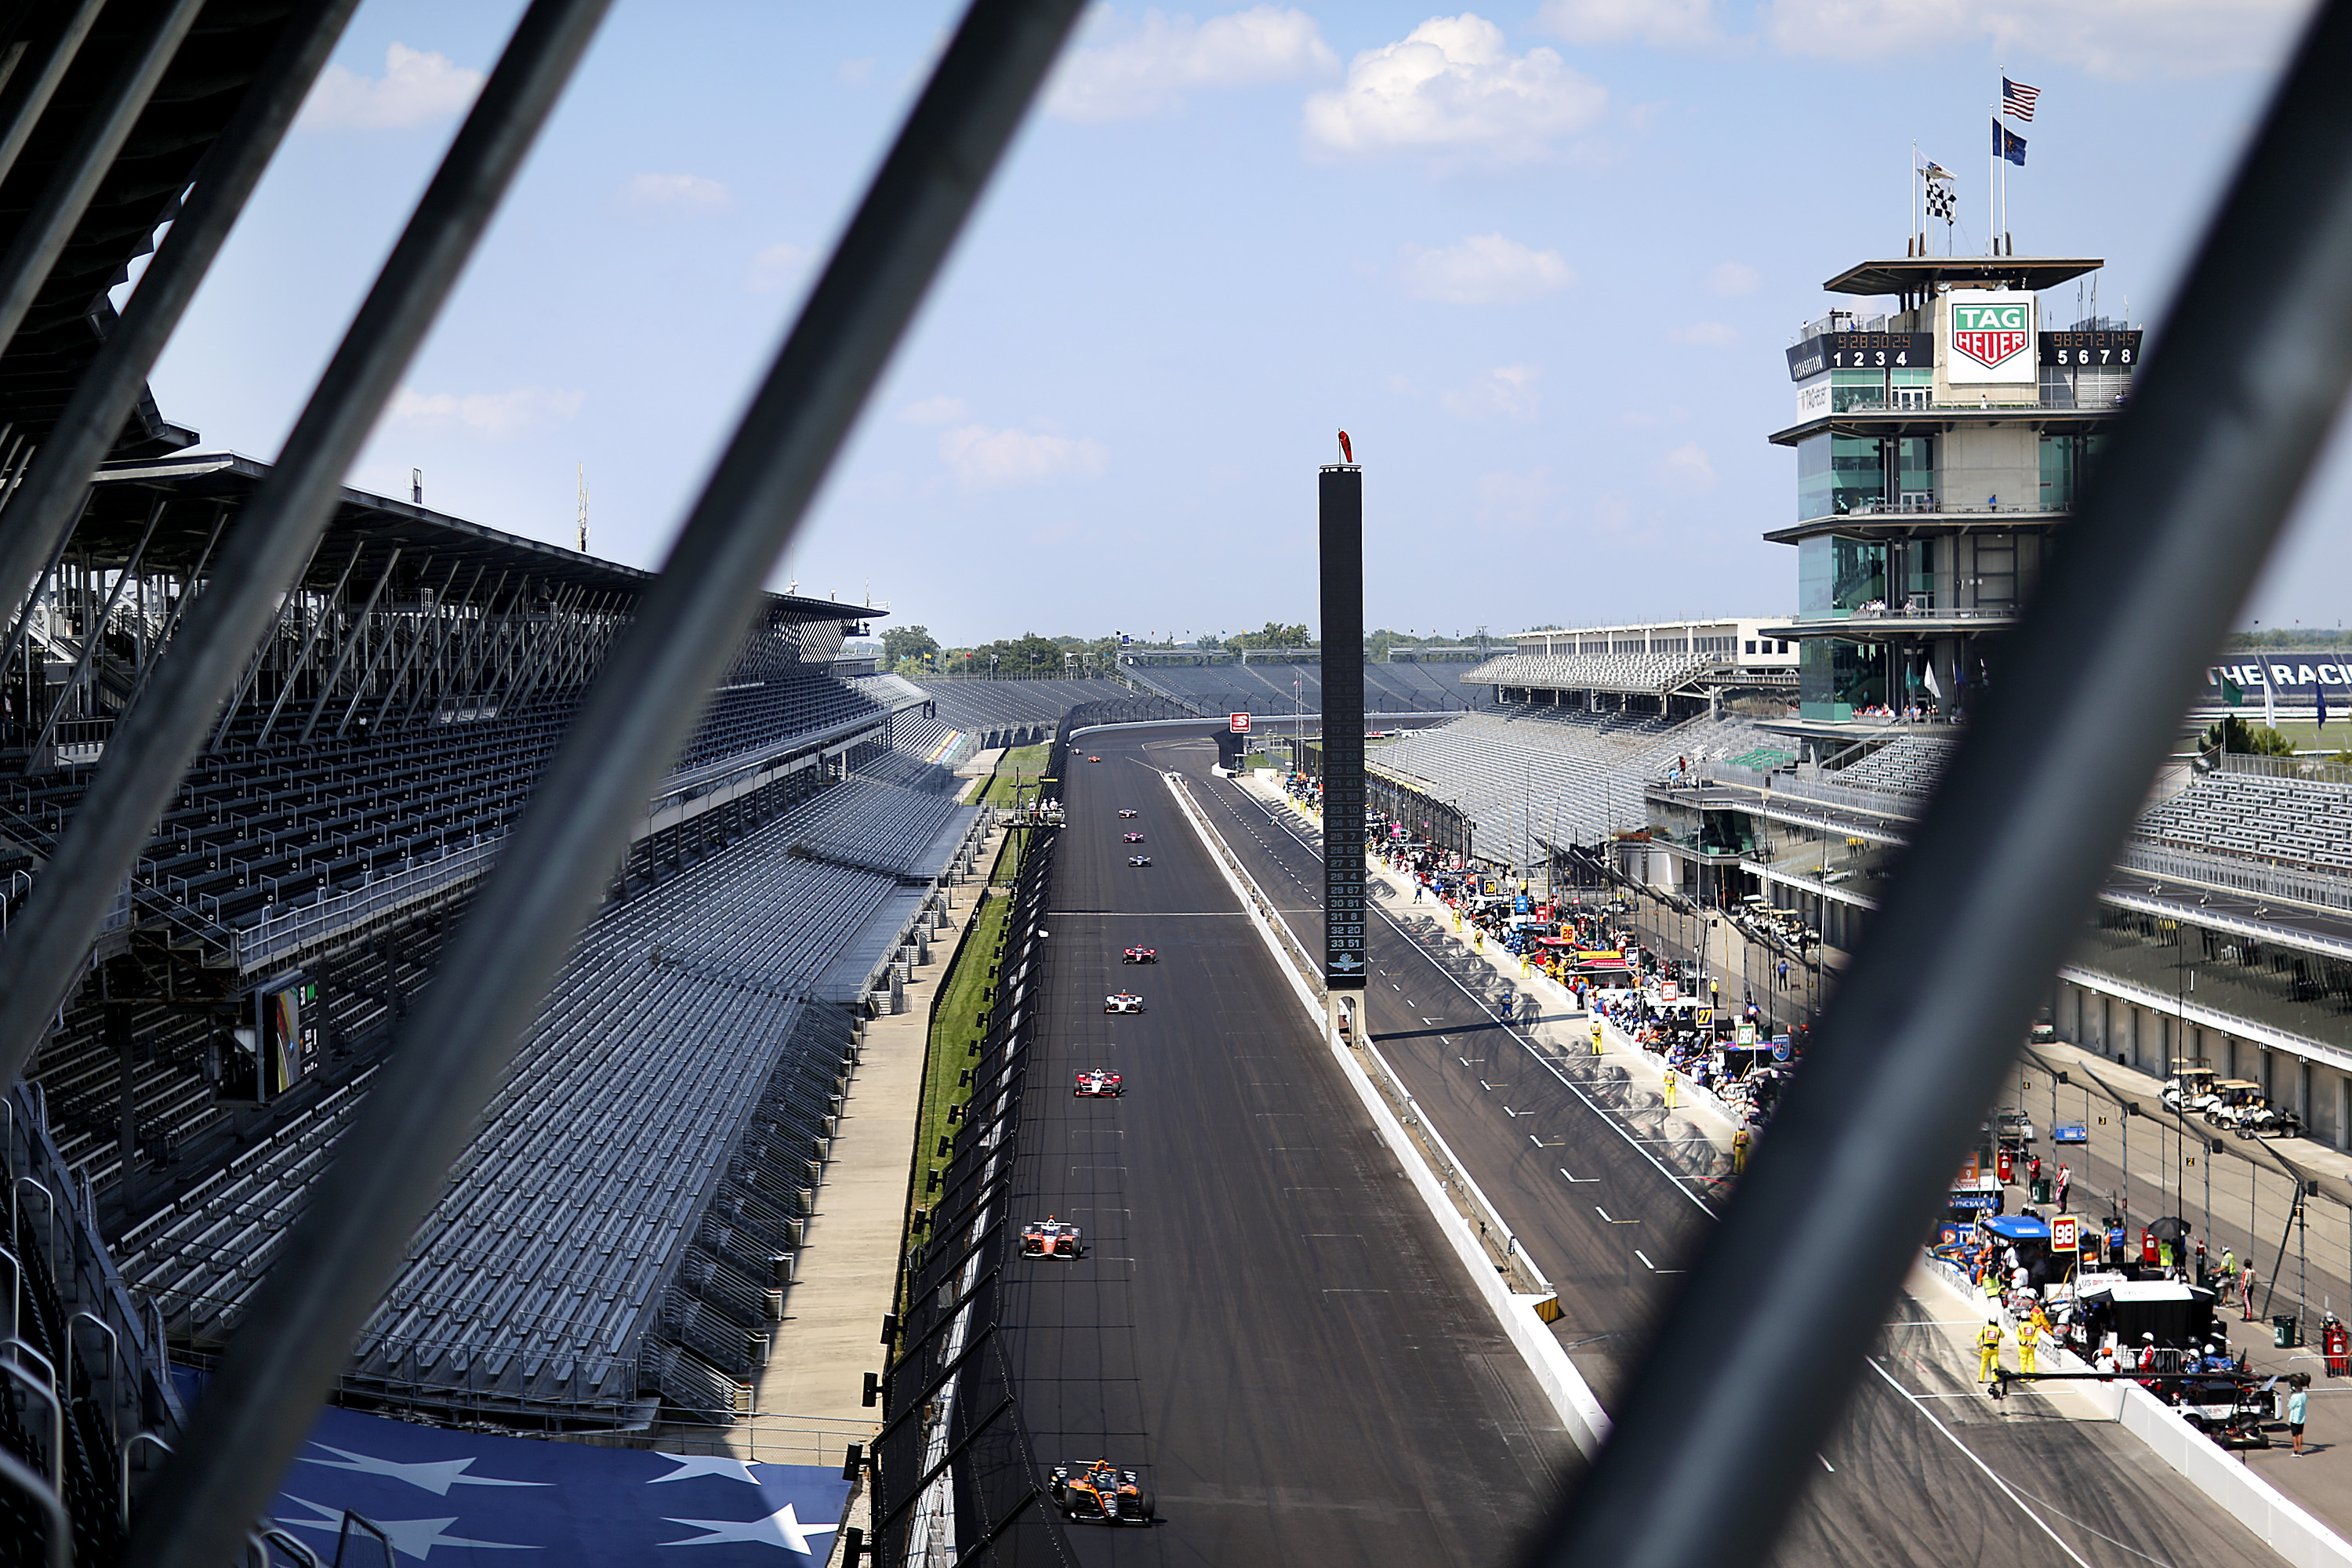 A general view of the race during the 104th running of the Indianapolis 500 at Indianapolis Motor Speedway on August 23, 2020 in Indianapolis, Indiana.